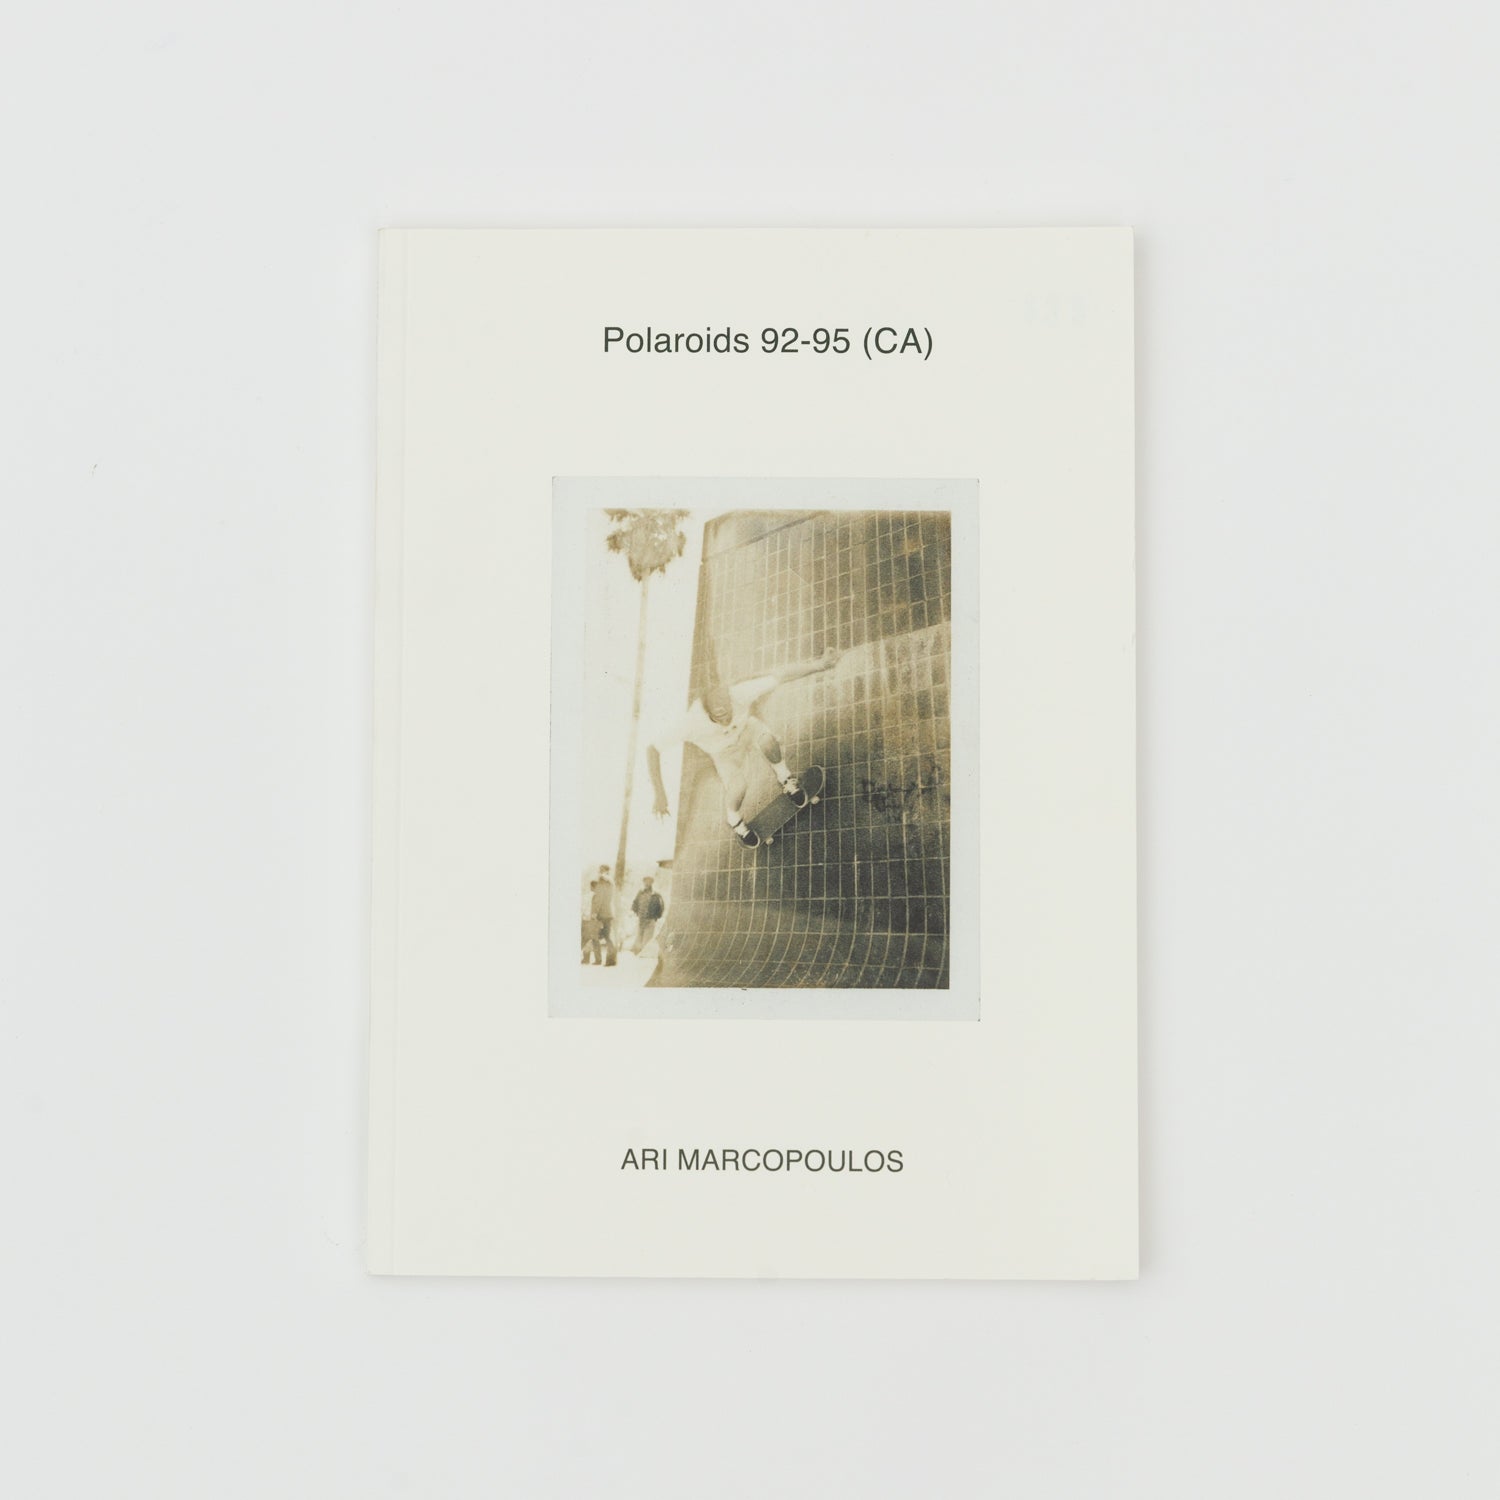 Load image into Gallery viewer, Ari Marcopoulos - Polaroids 92-95 (CA)